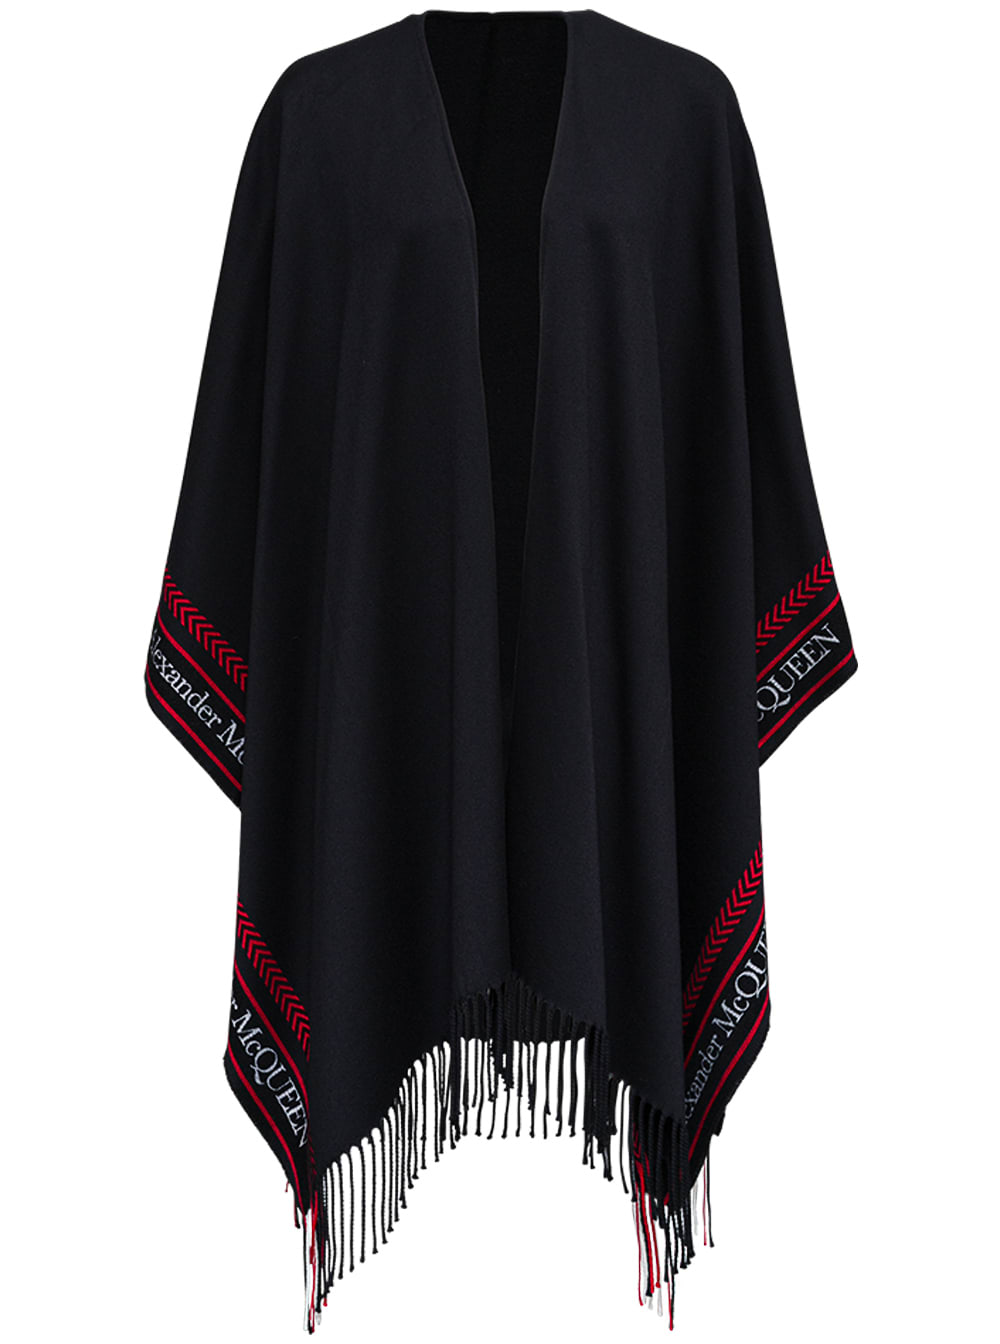 Alexander McQueen Black Wool And Cachemere Cape With Contrasting Logo